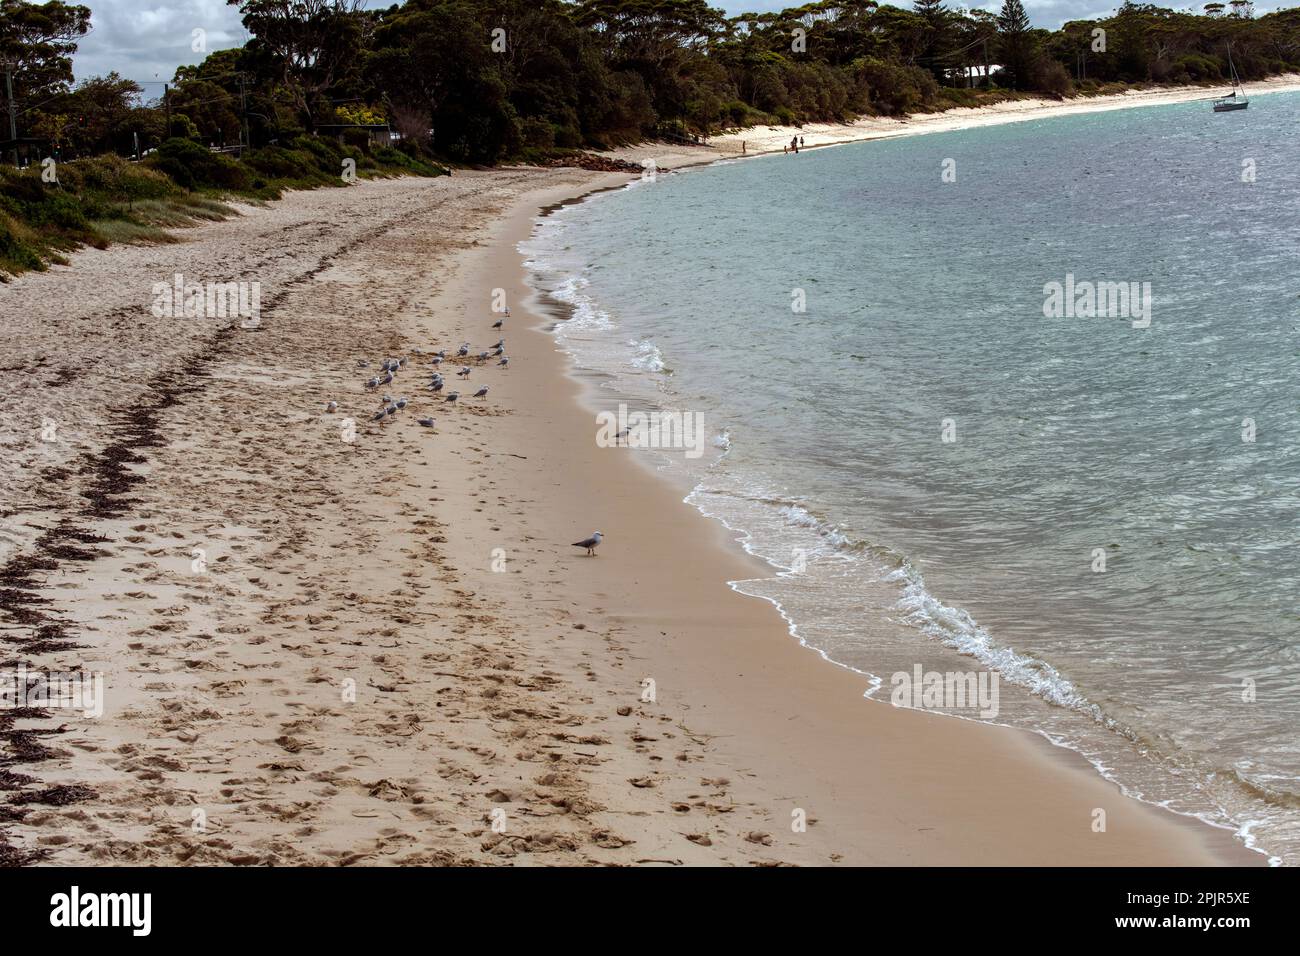 Shoal Bay Beach, Port Stephens, Mid North Coast, New South Wales, Australia. Shoal Bay is the most eastern suburb of the Port Stephens local governmen Stock Photo